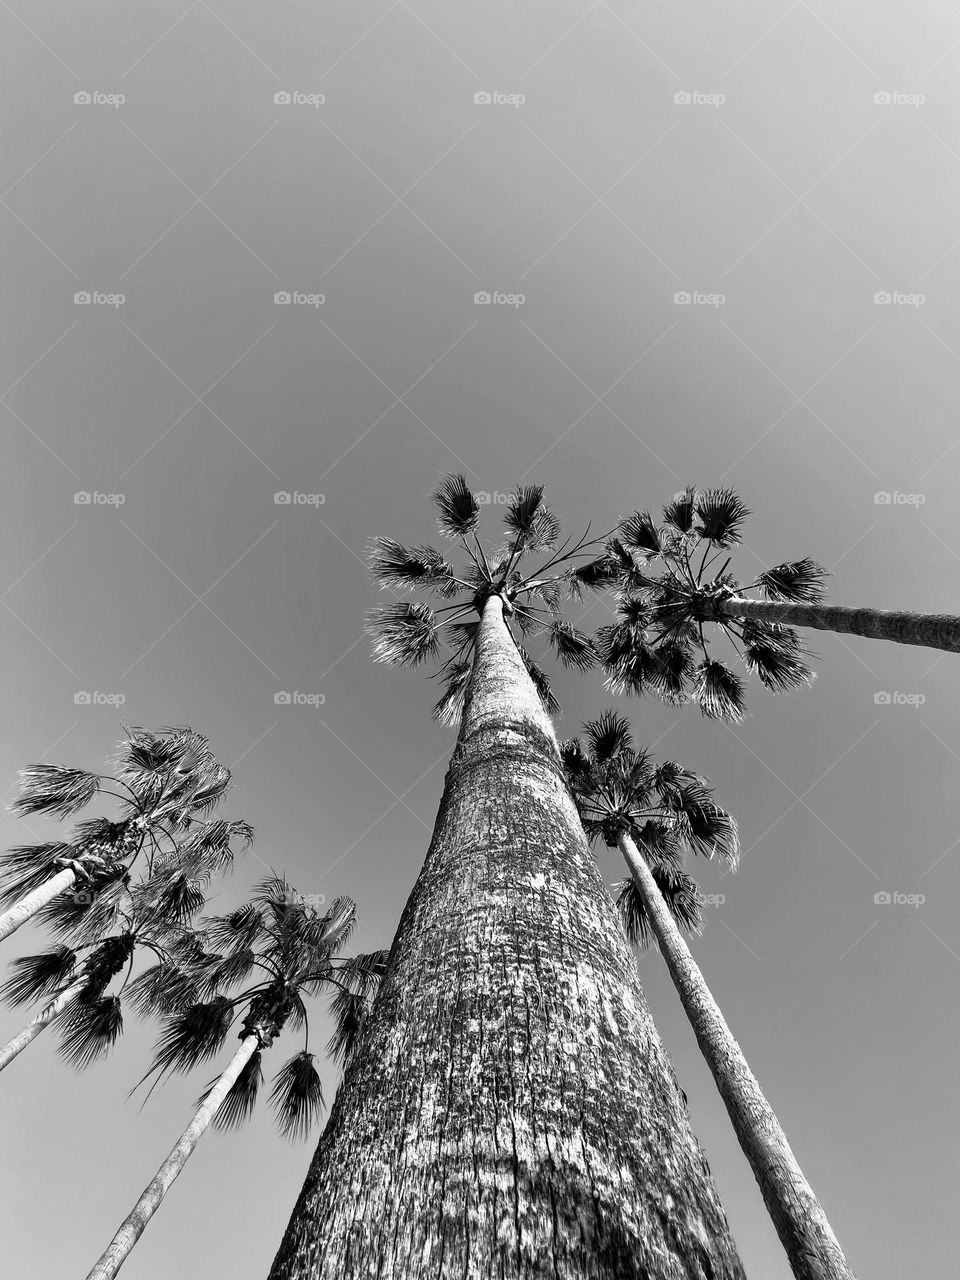 Palms in black and white seen from the ground 